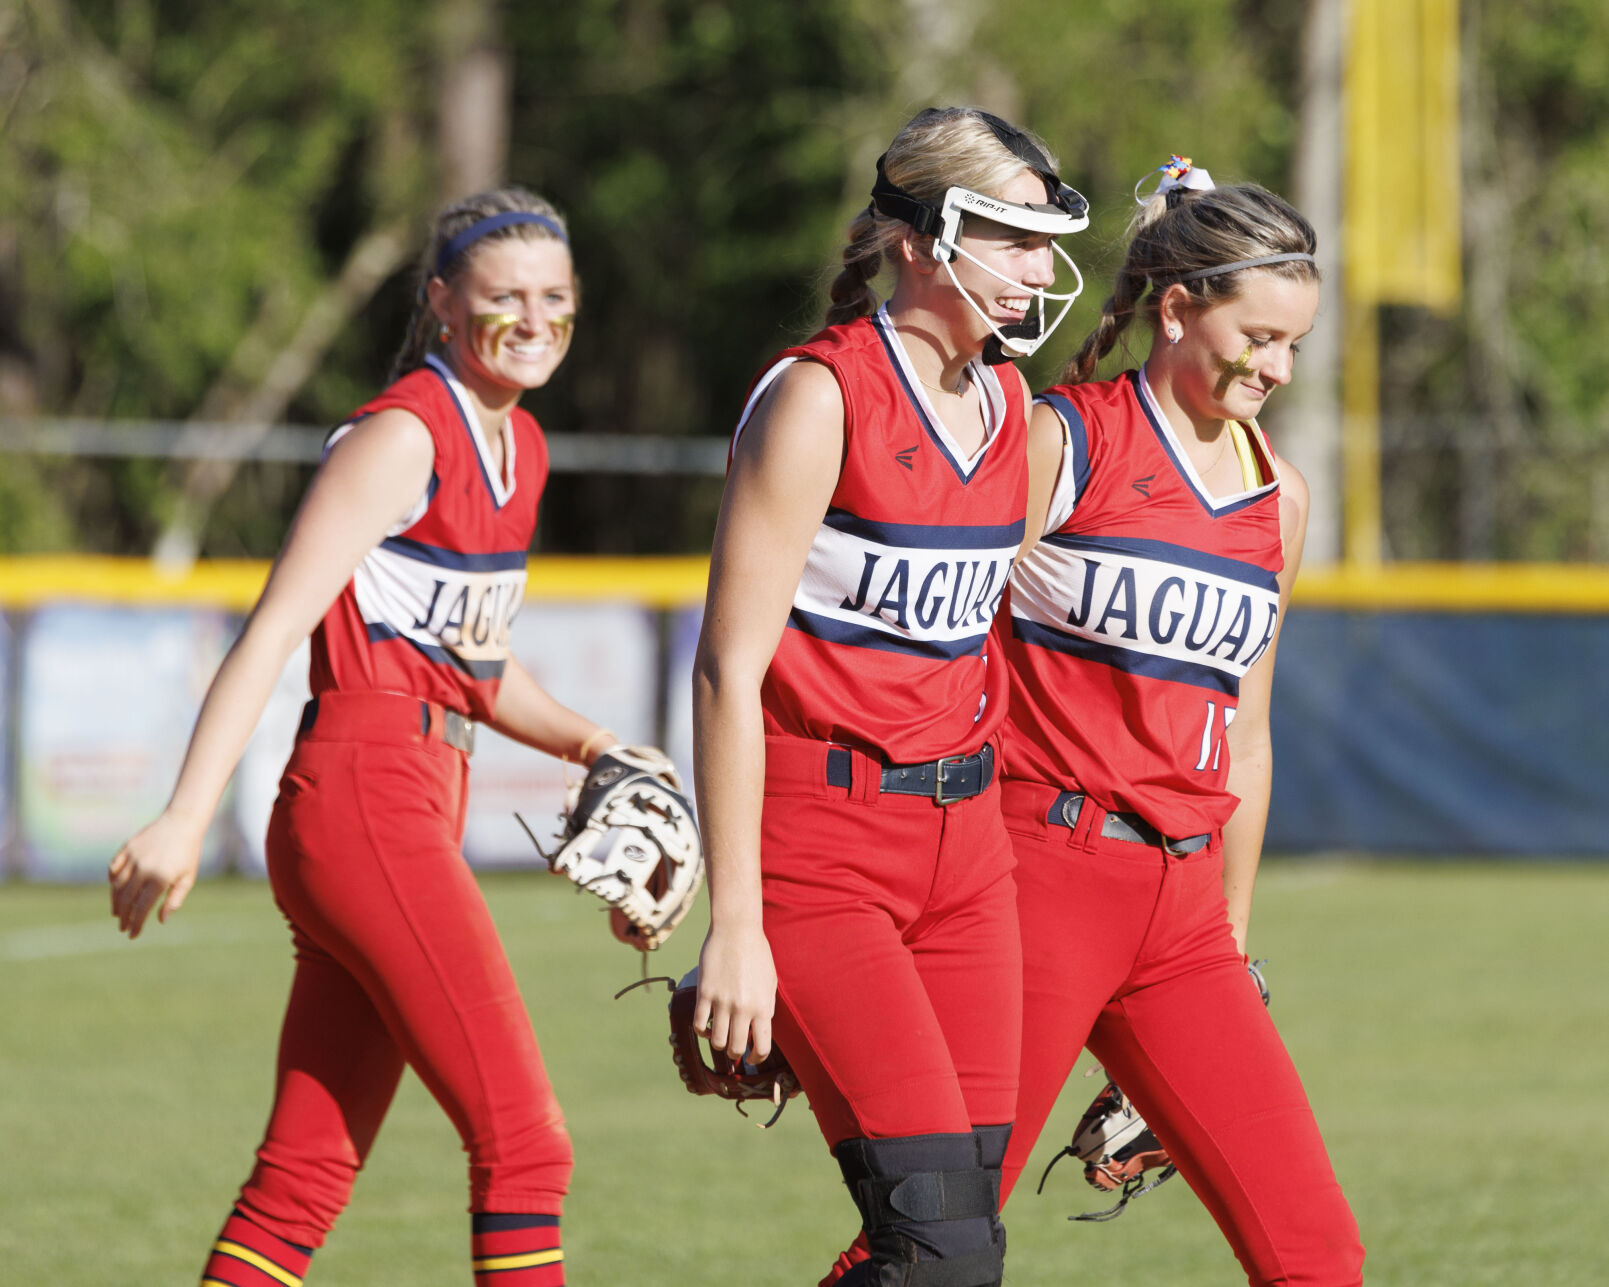 St. Tammany Parish Softball Teams Shine in First Round Playoff Games